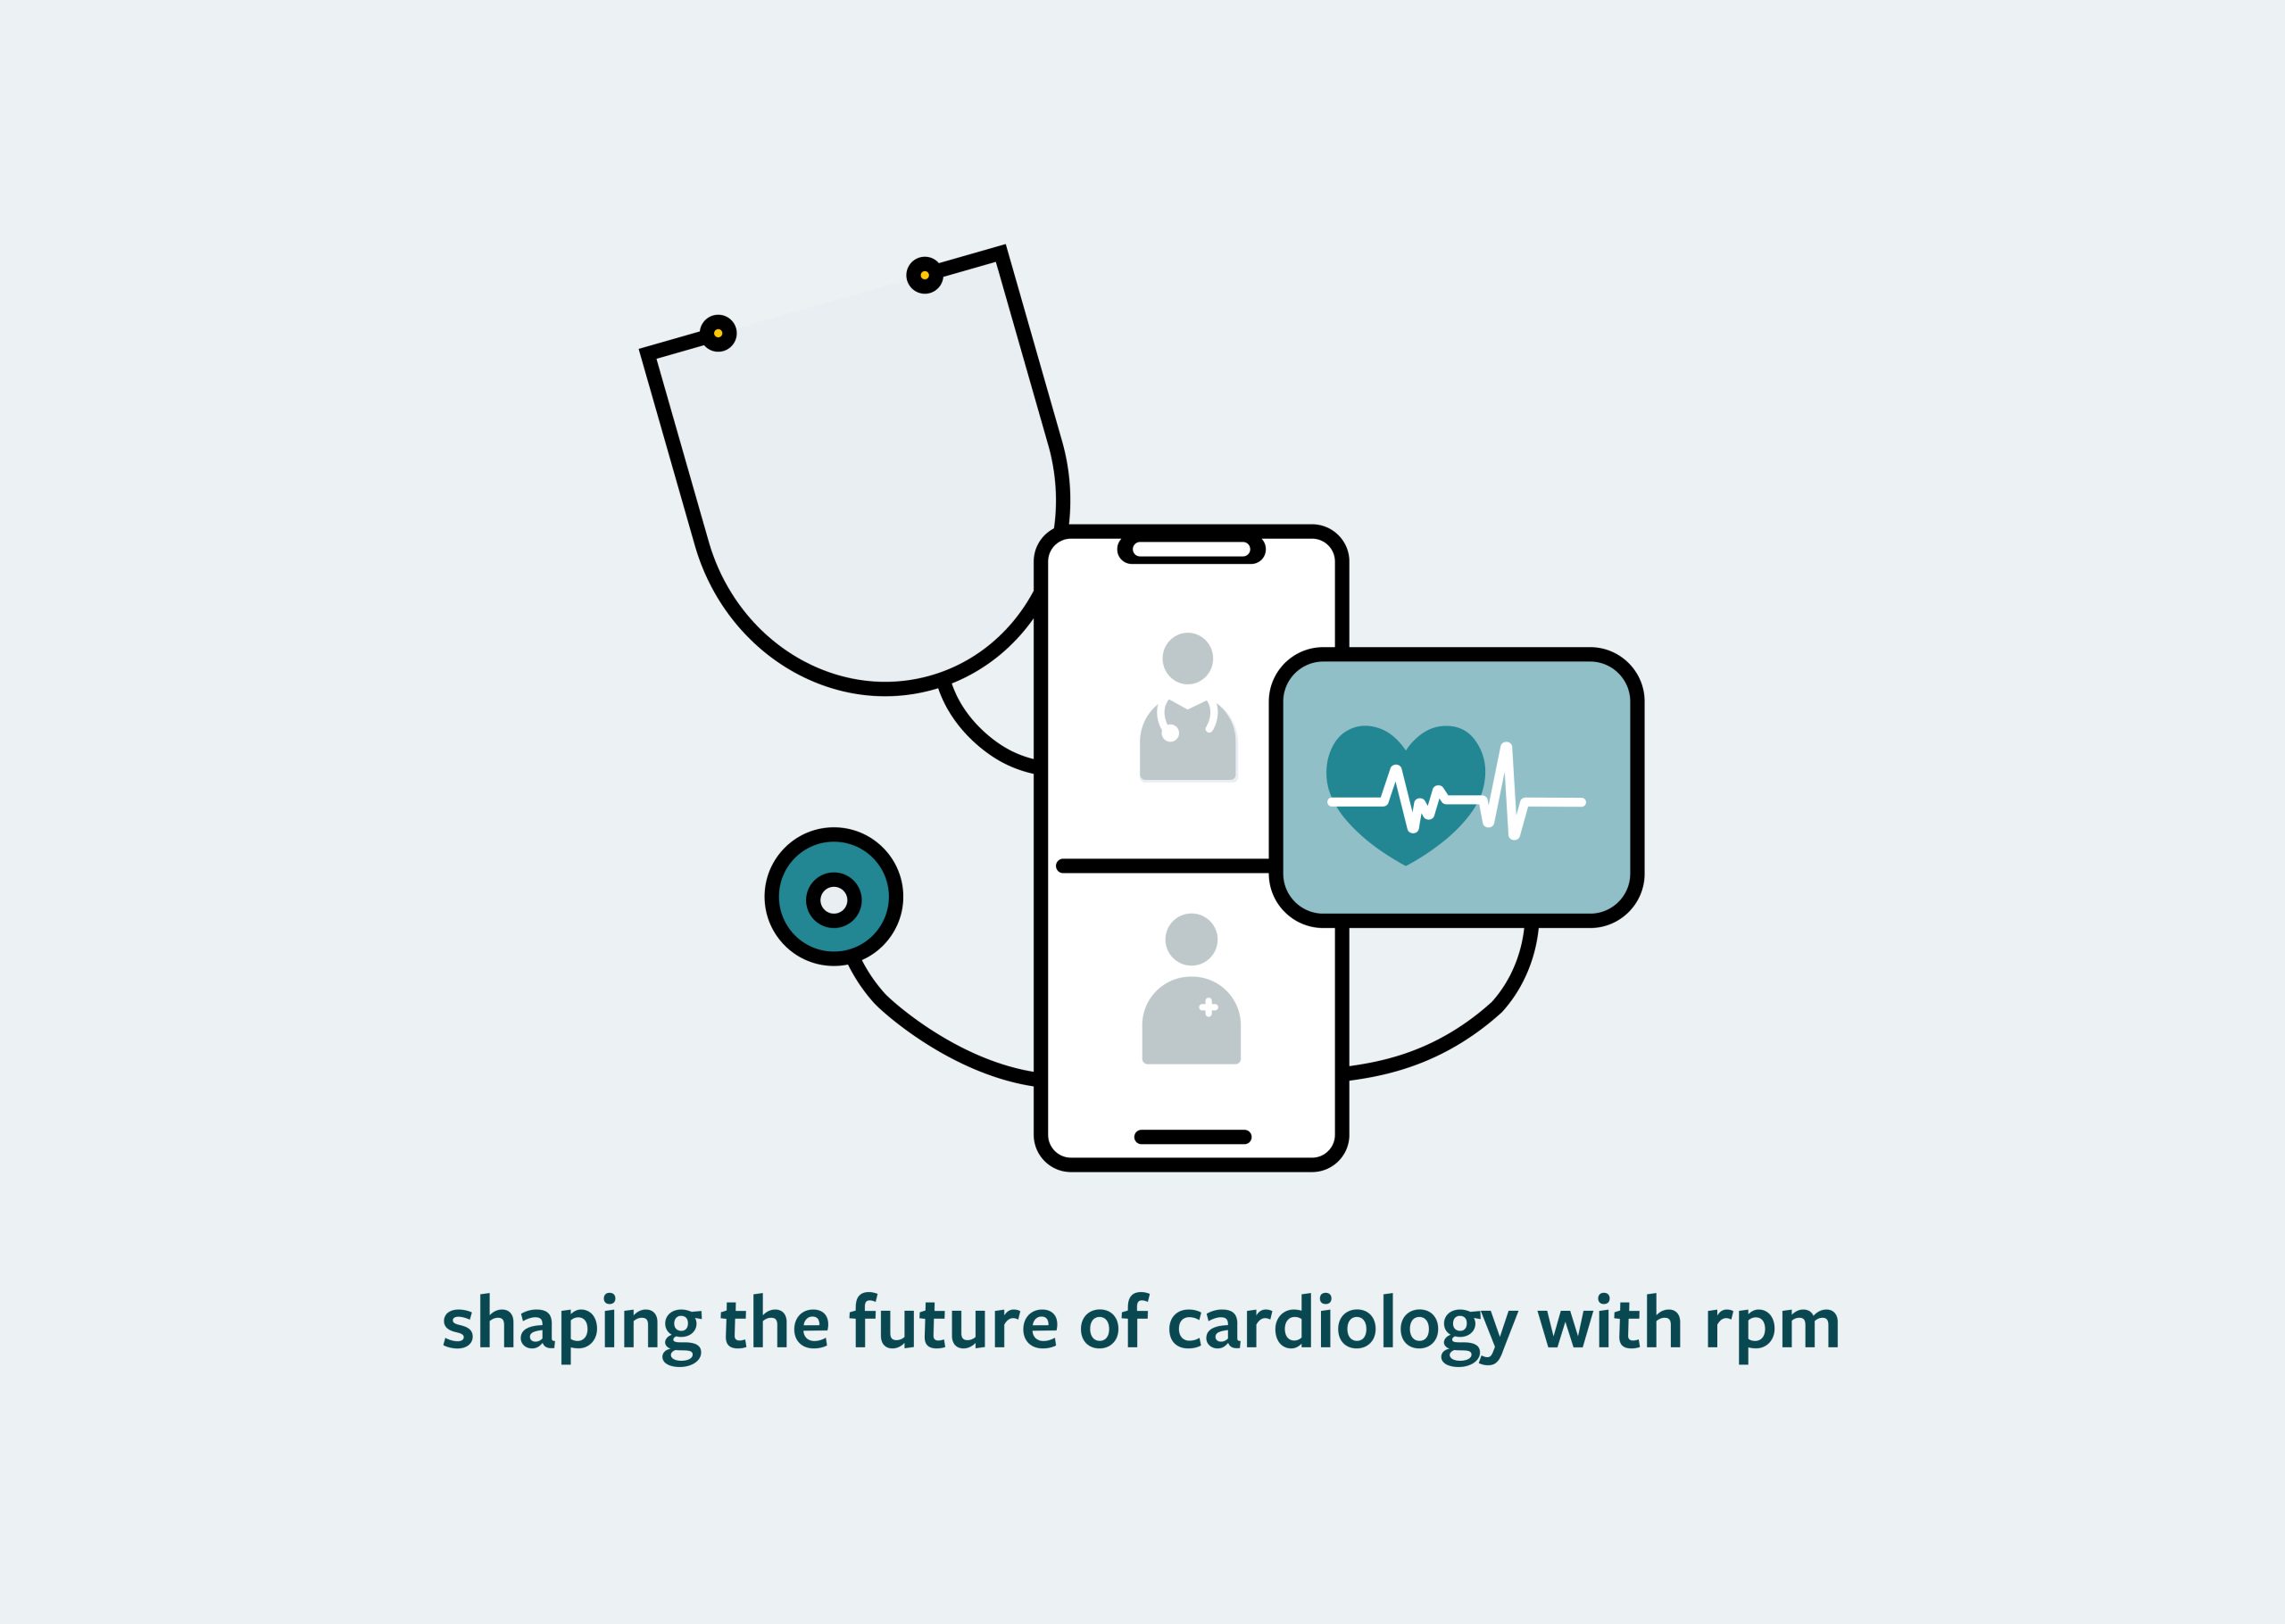 RPM in cardiology